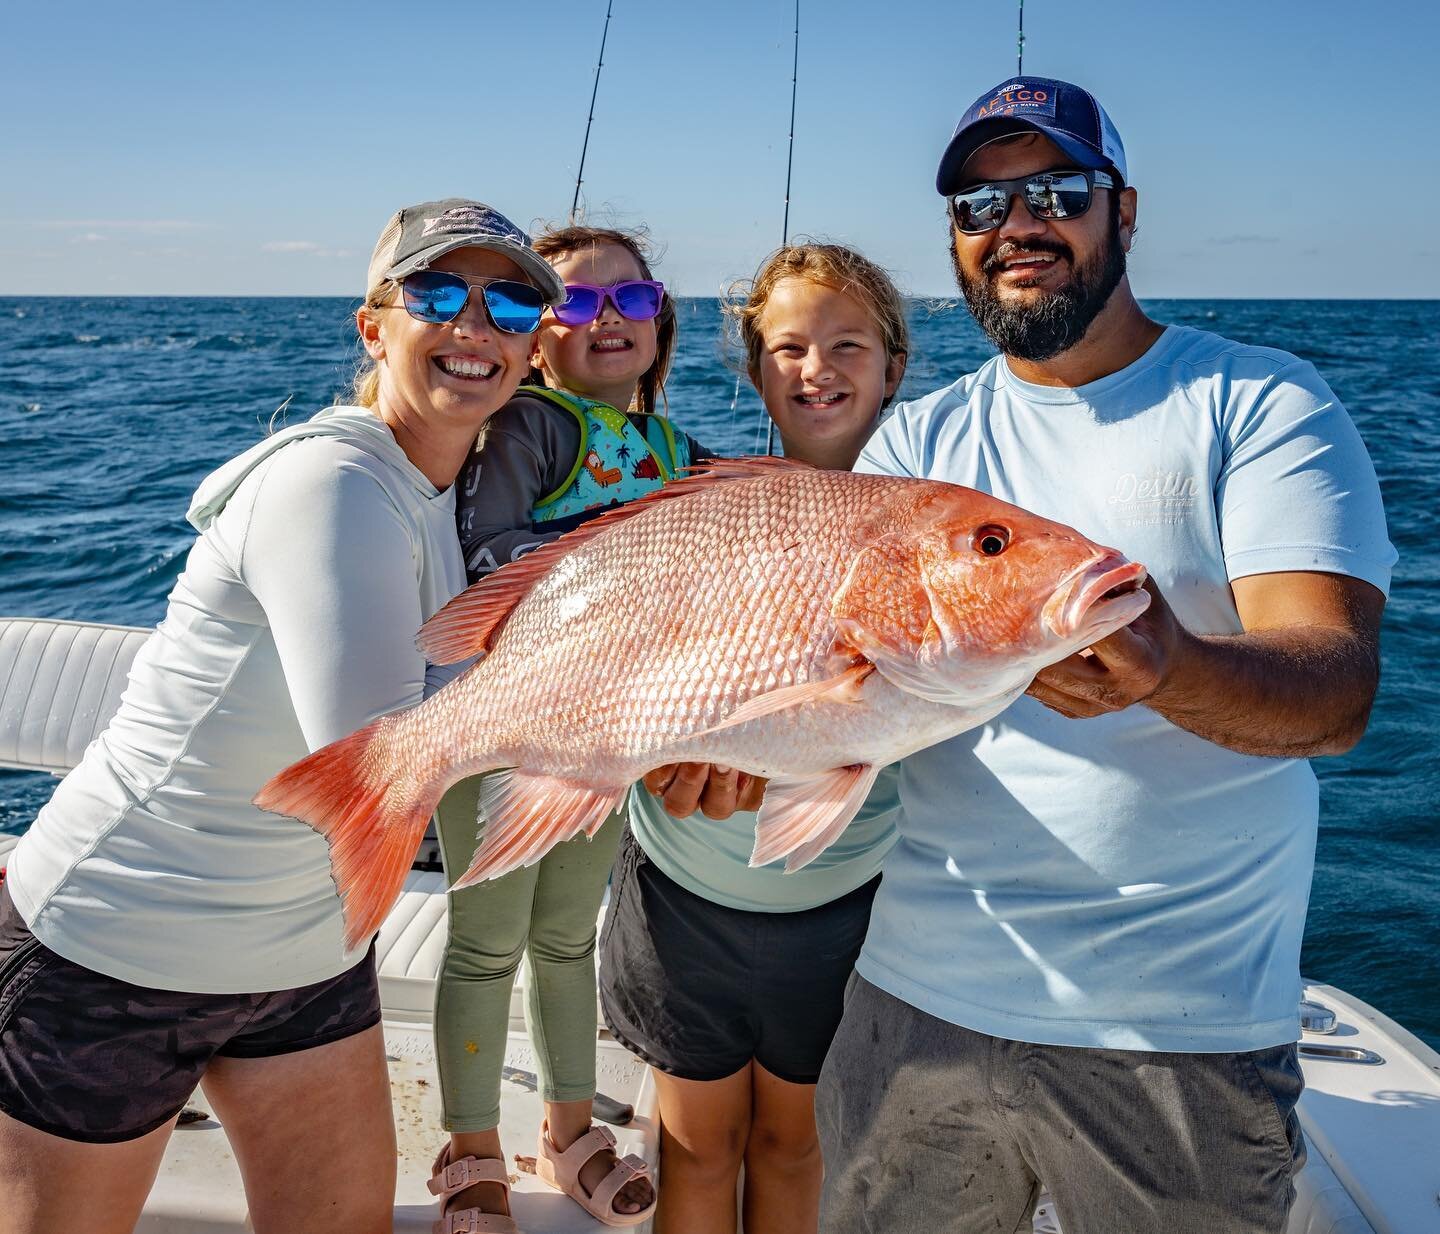 Have you heard the exciting Redsnapper news for Florida? .
.
Governor Ron DeSantis announced a 17-day extension of the record gulf recreational red snapper season, adding every Friday through Sunday in September, Labor Day and Thanksgiving Day to the